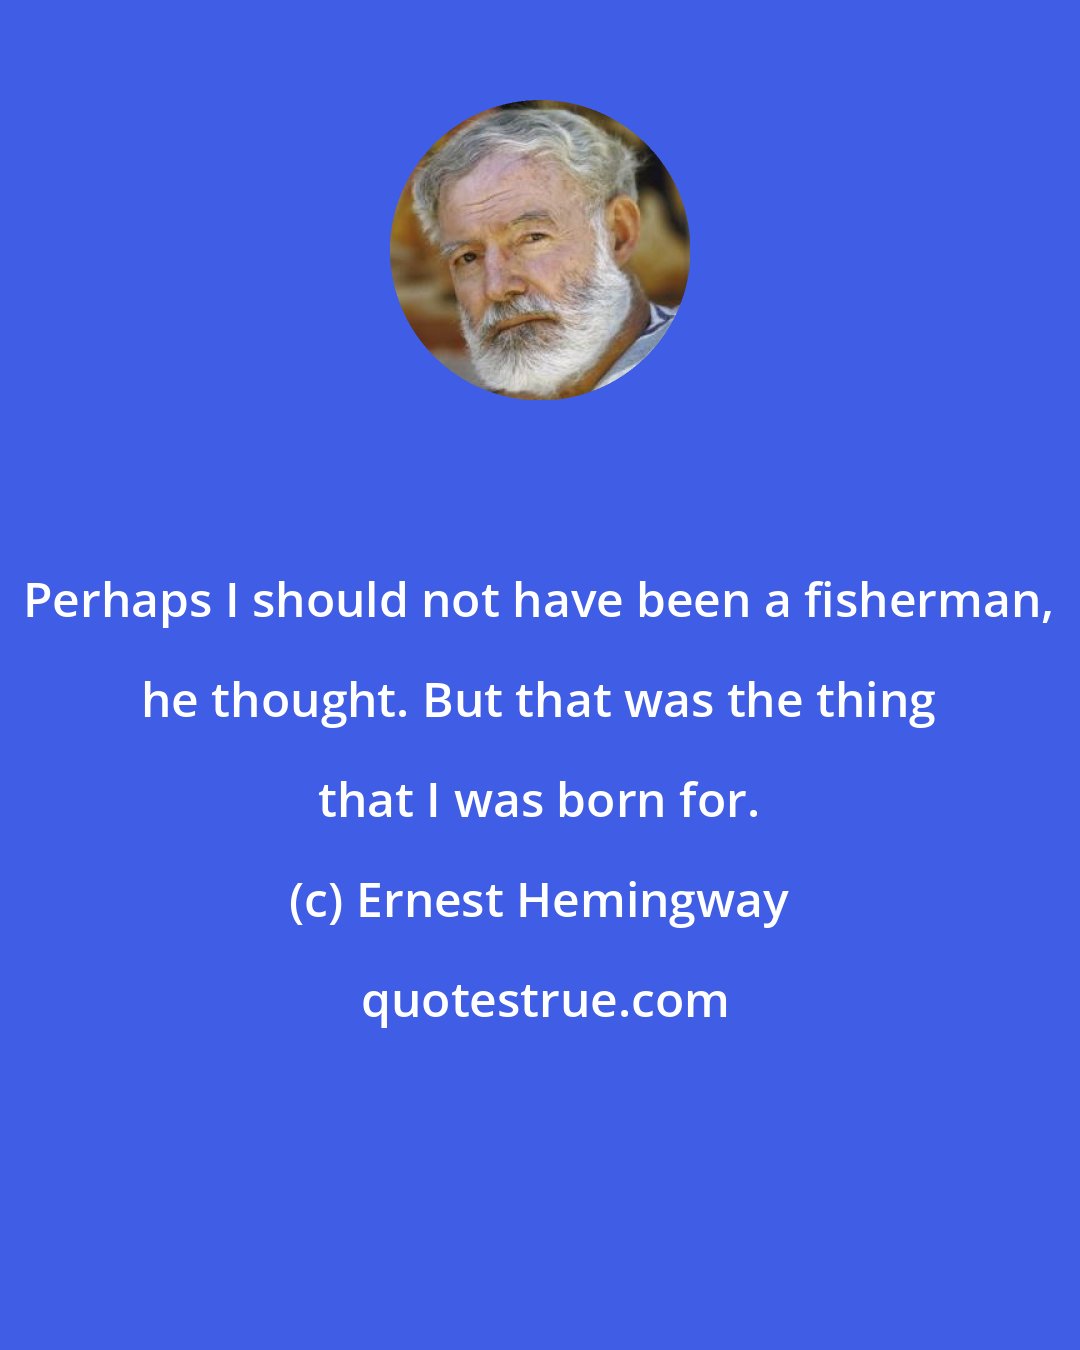 Ernest Hemingway: Perhaps I should not have been a fisherman, he thought. But that was the thing that I was born for.